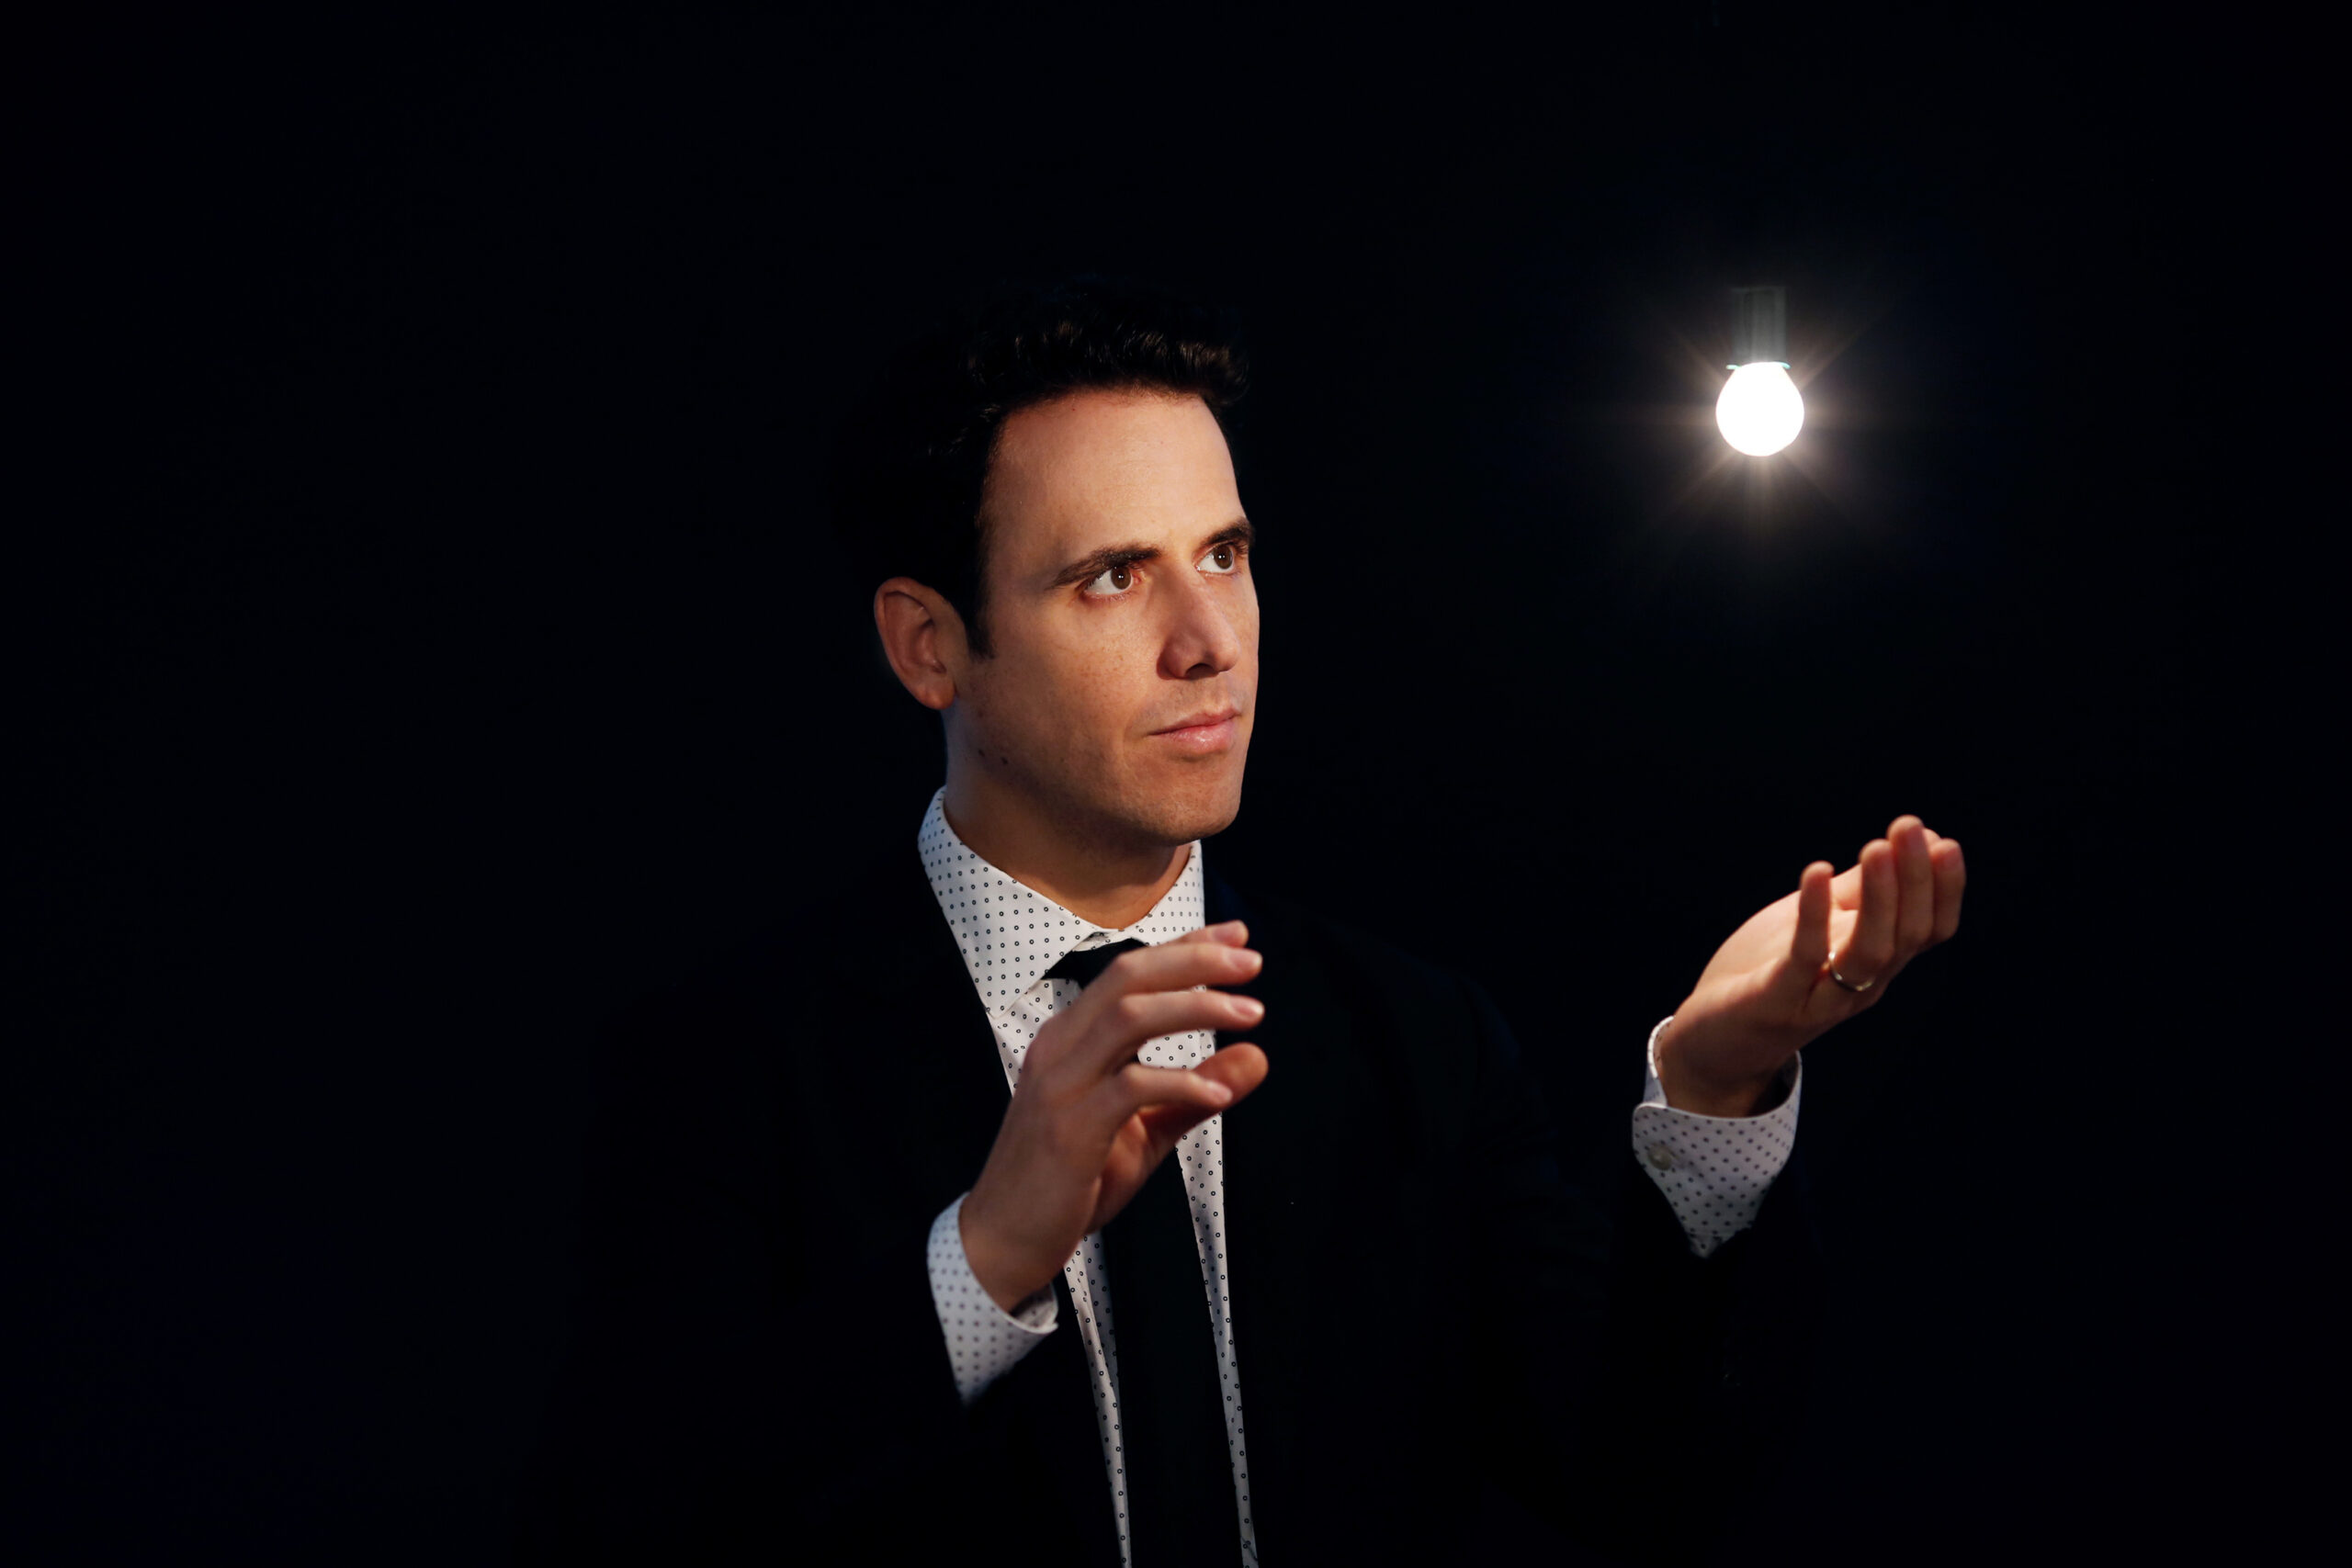 Mentalist Oz Pearlman performs at WHBPAC on August 21. COURTESY WHBPAC